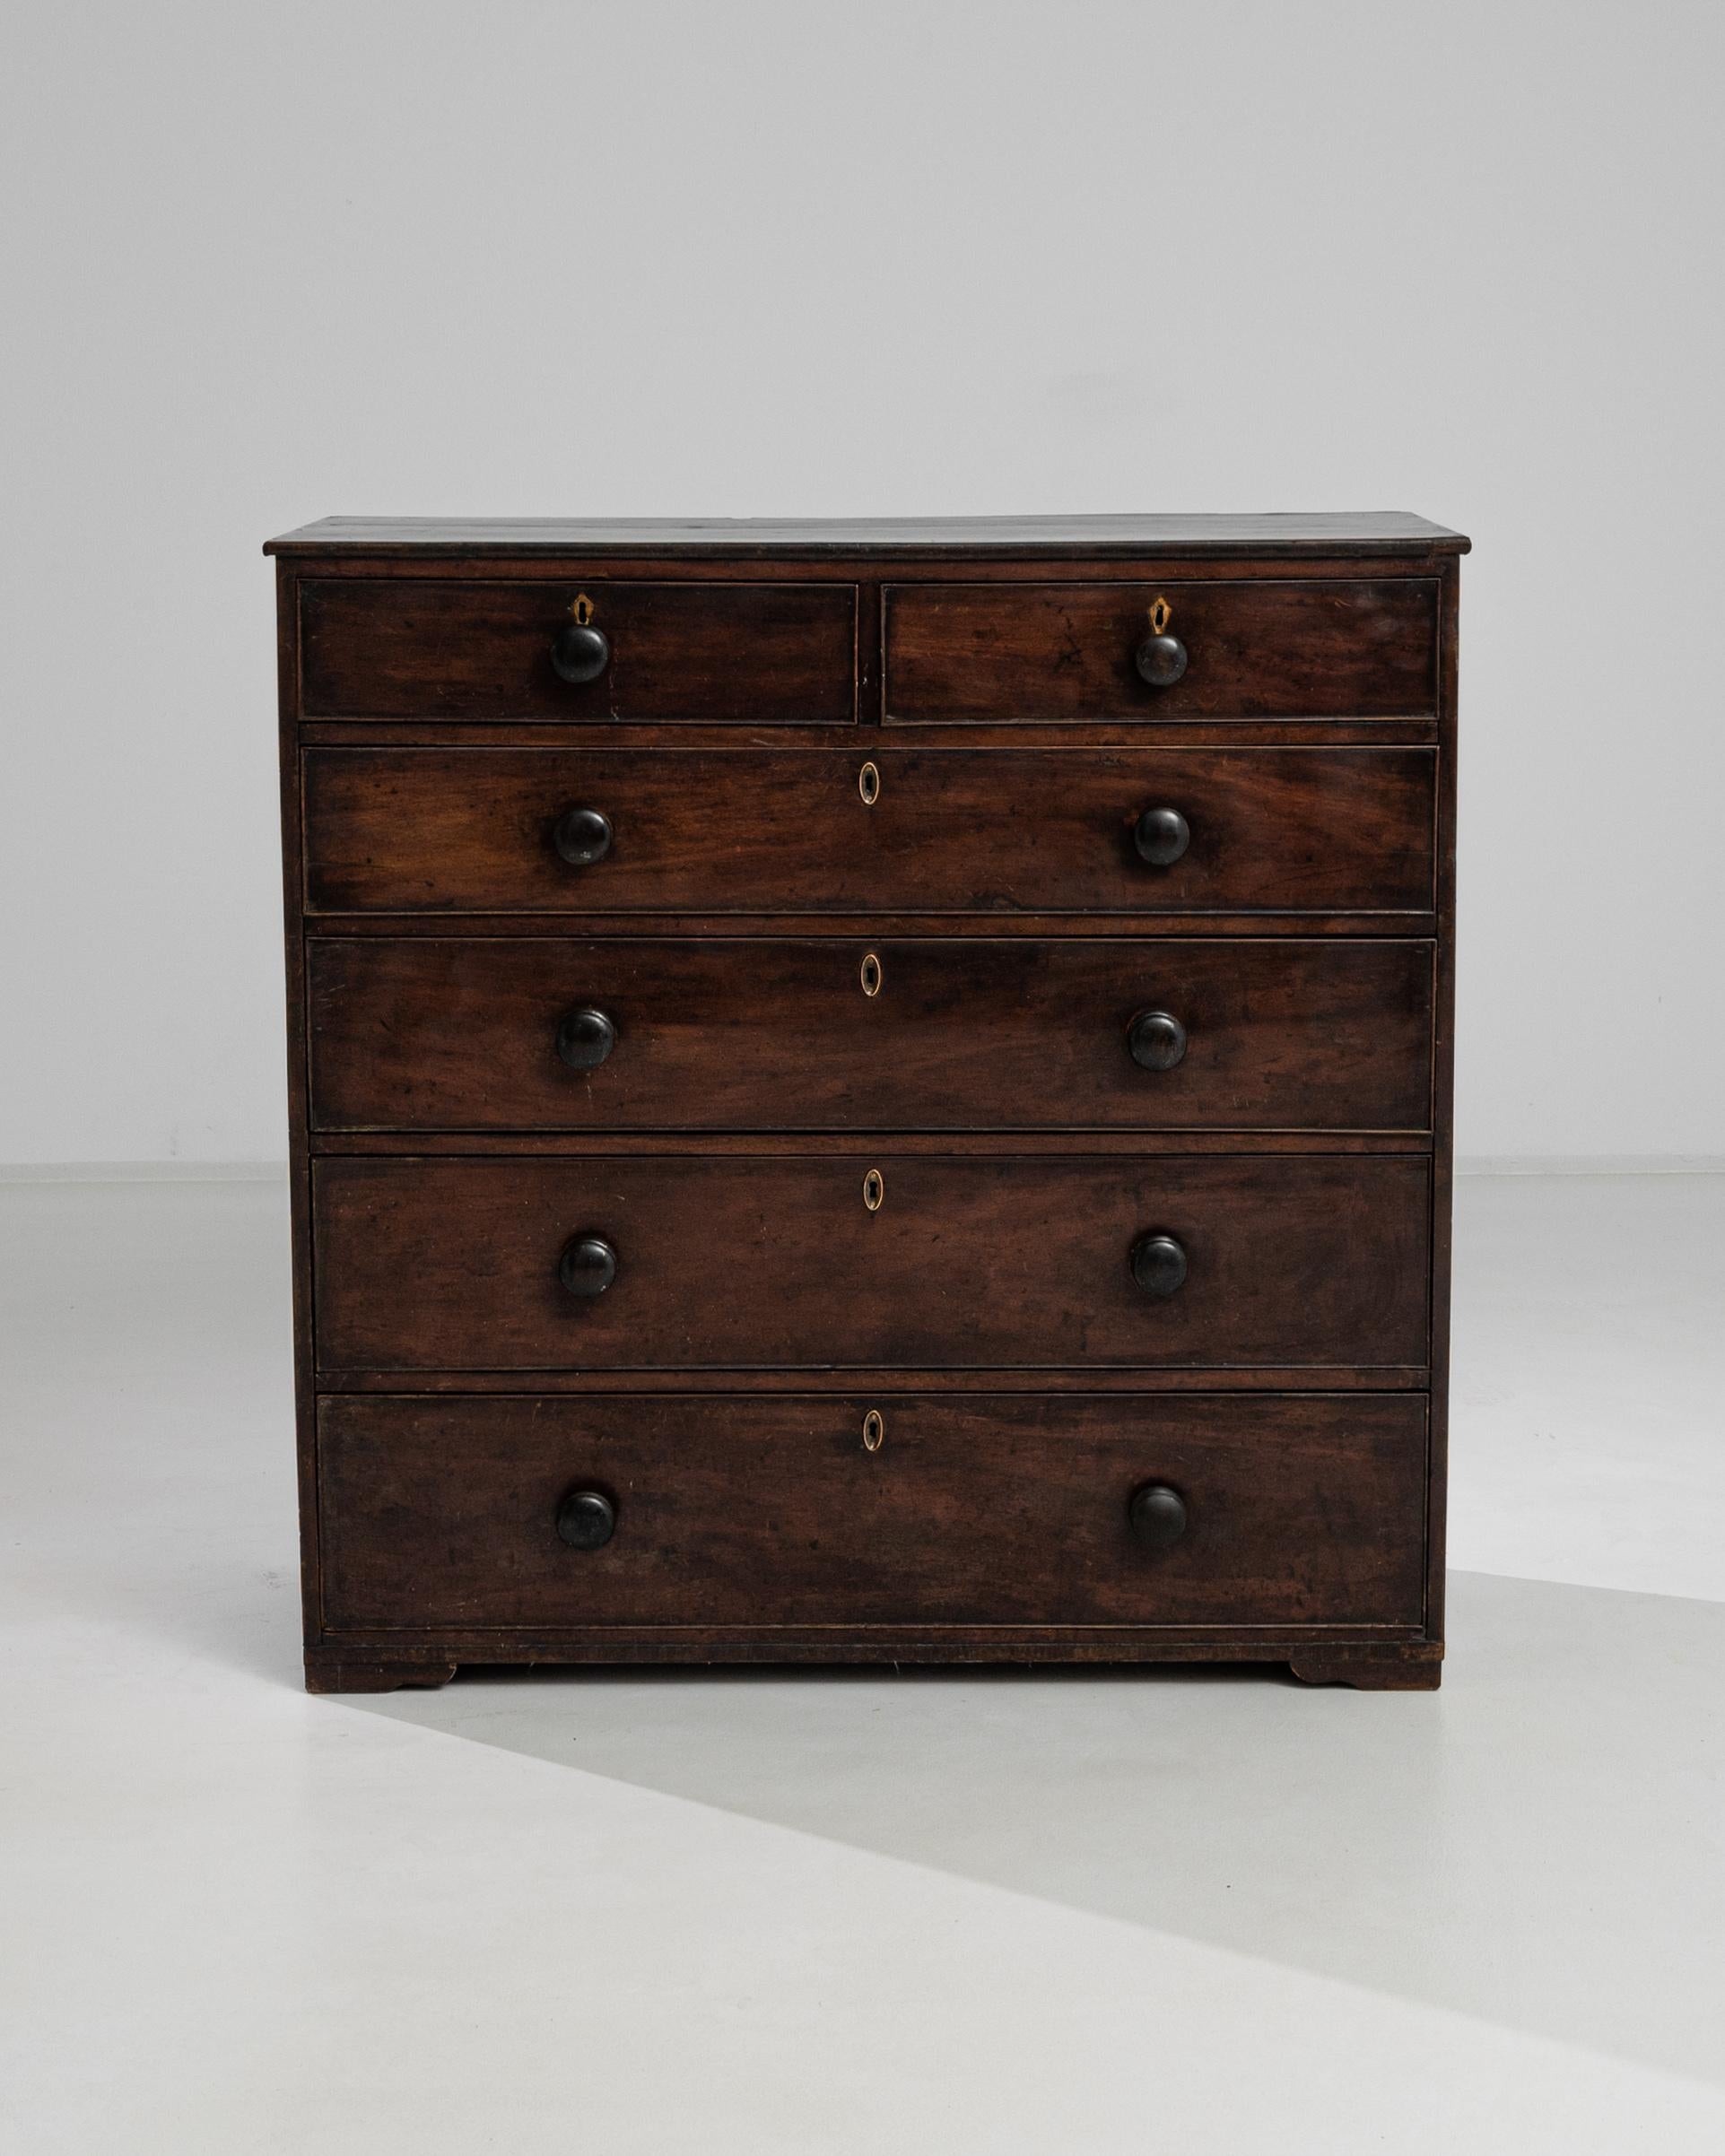 1860s British Wooden Chest of Drawers with Original Patina 2